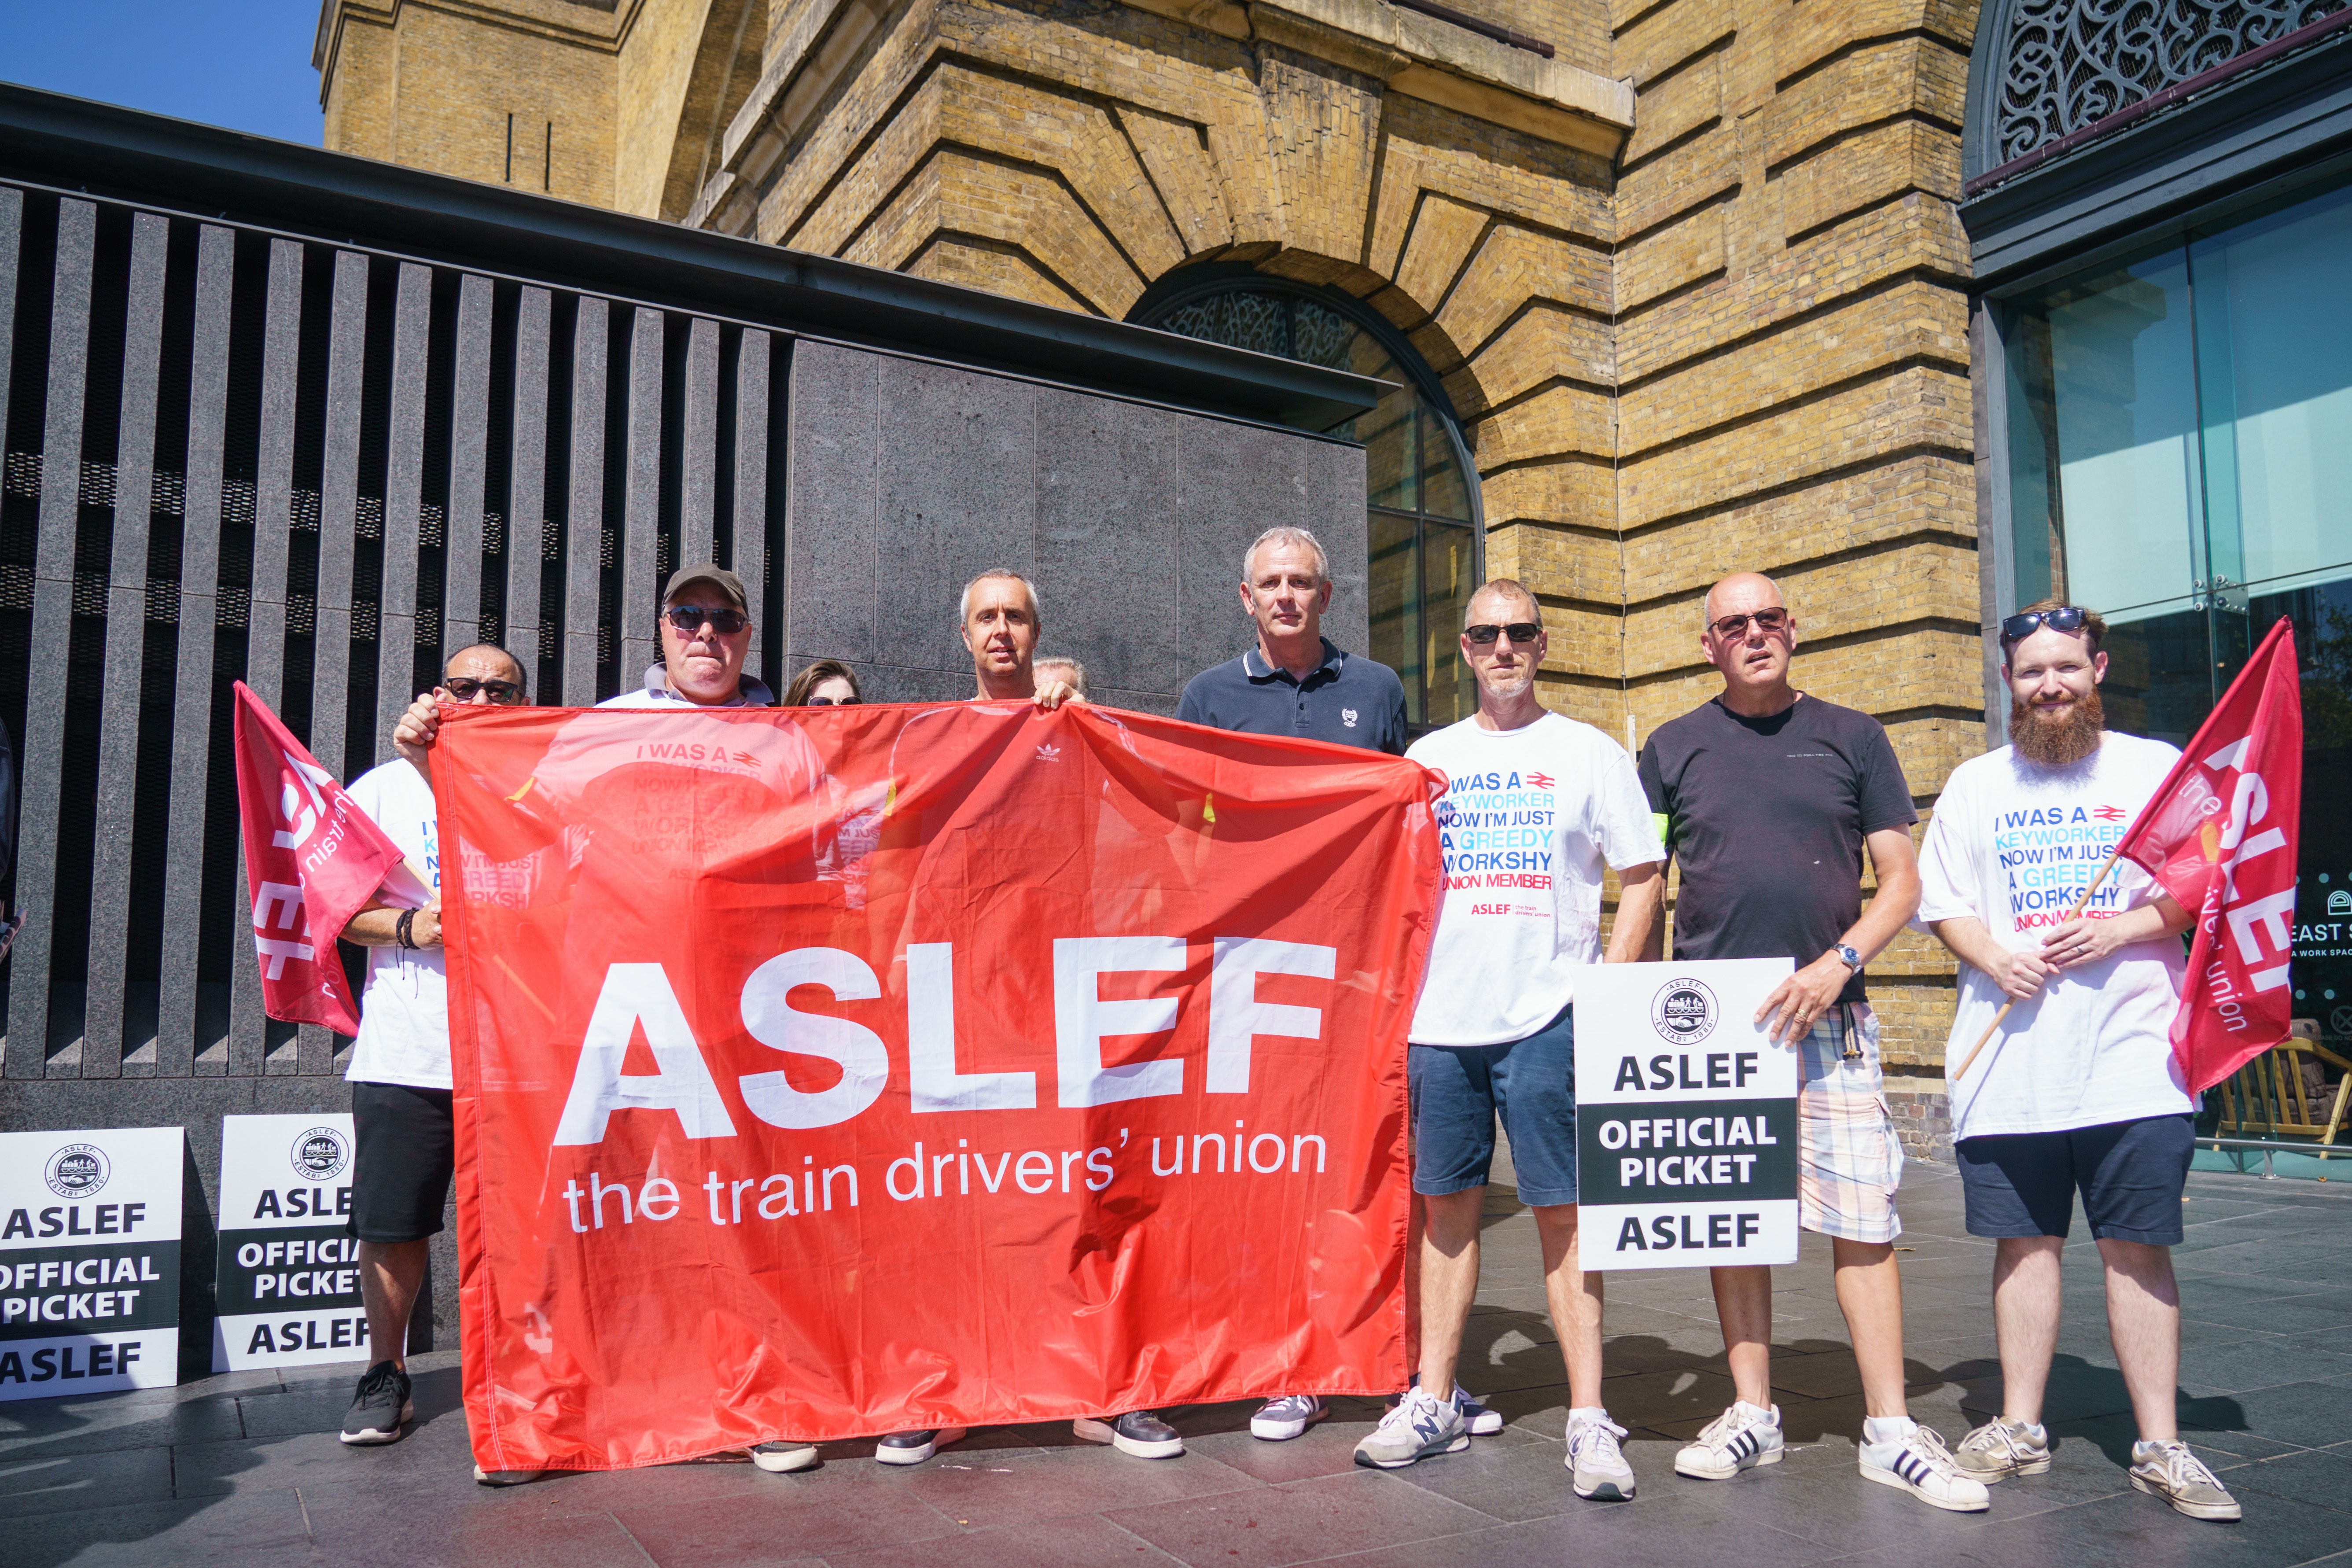 Aslef members at a picket line at Kings Cross station in London last month. More strikes are set to be held (Dominic Lipinski/PA)